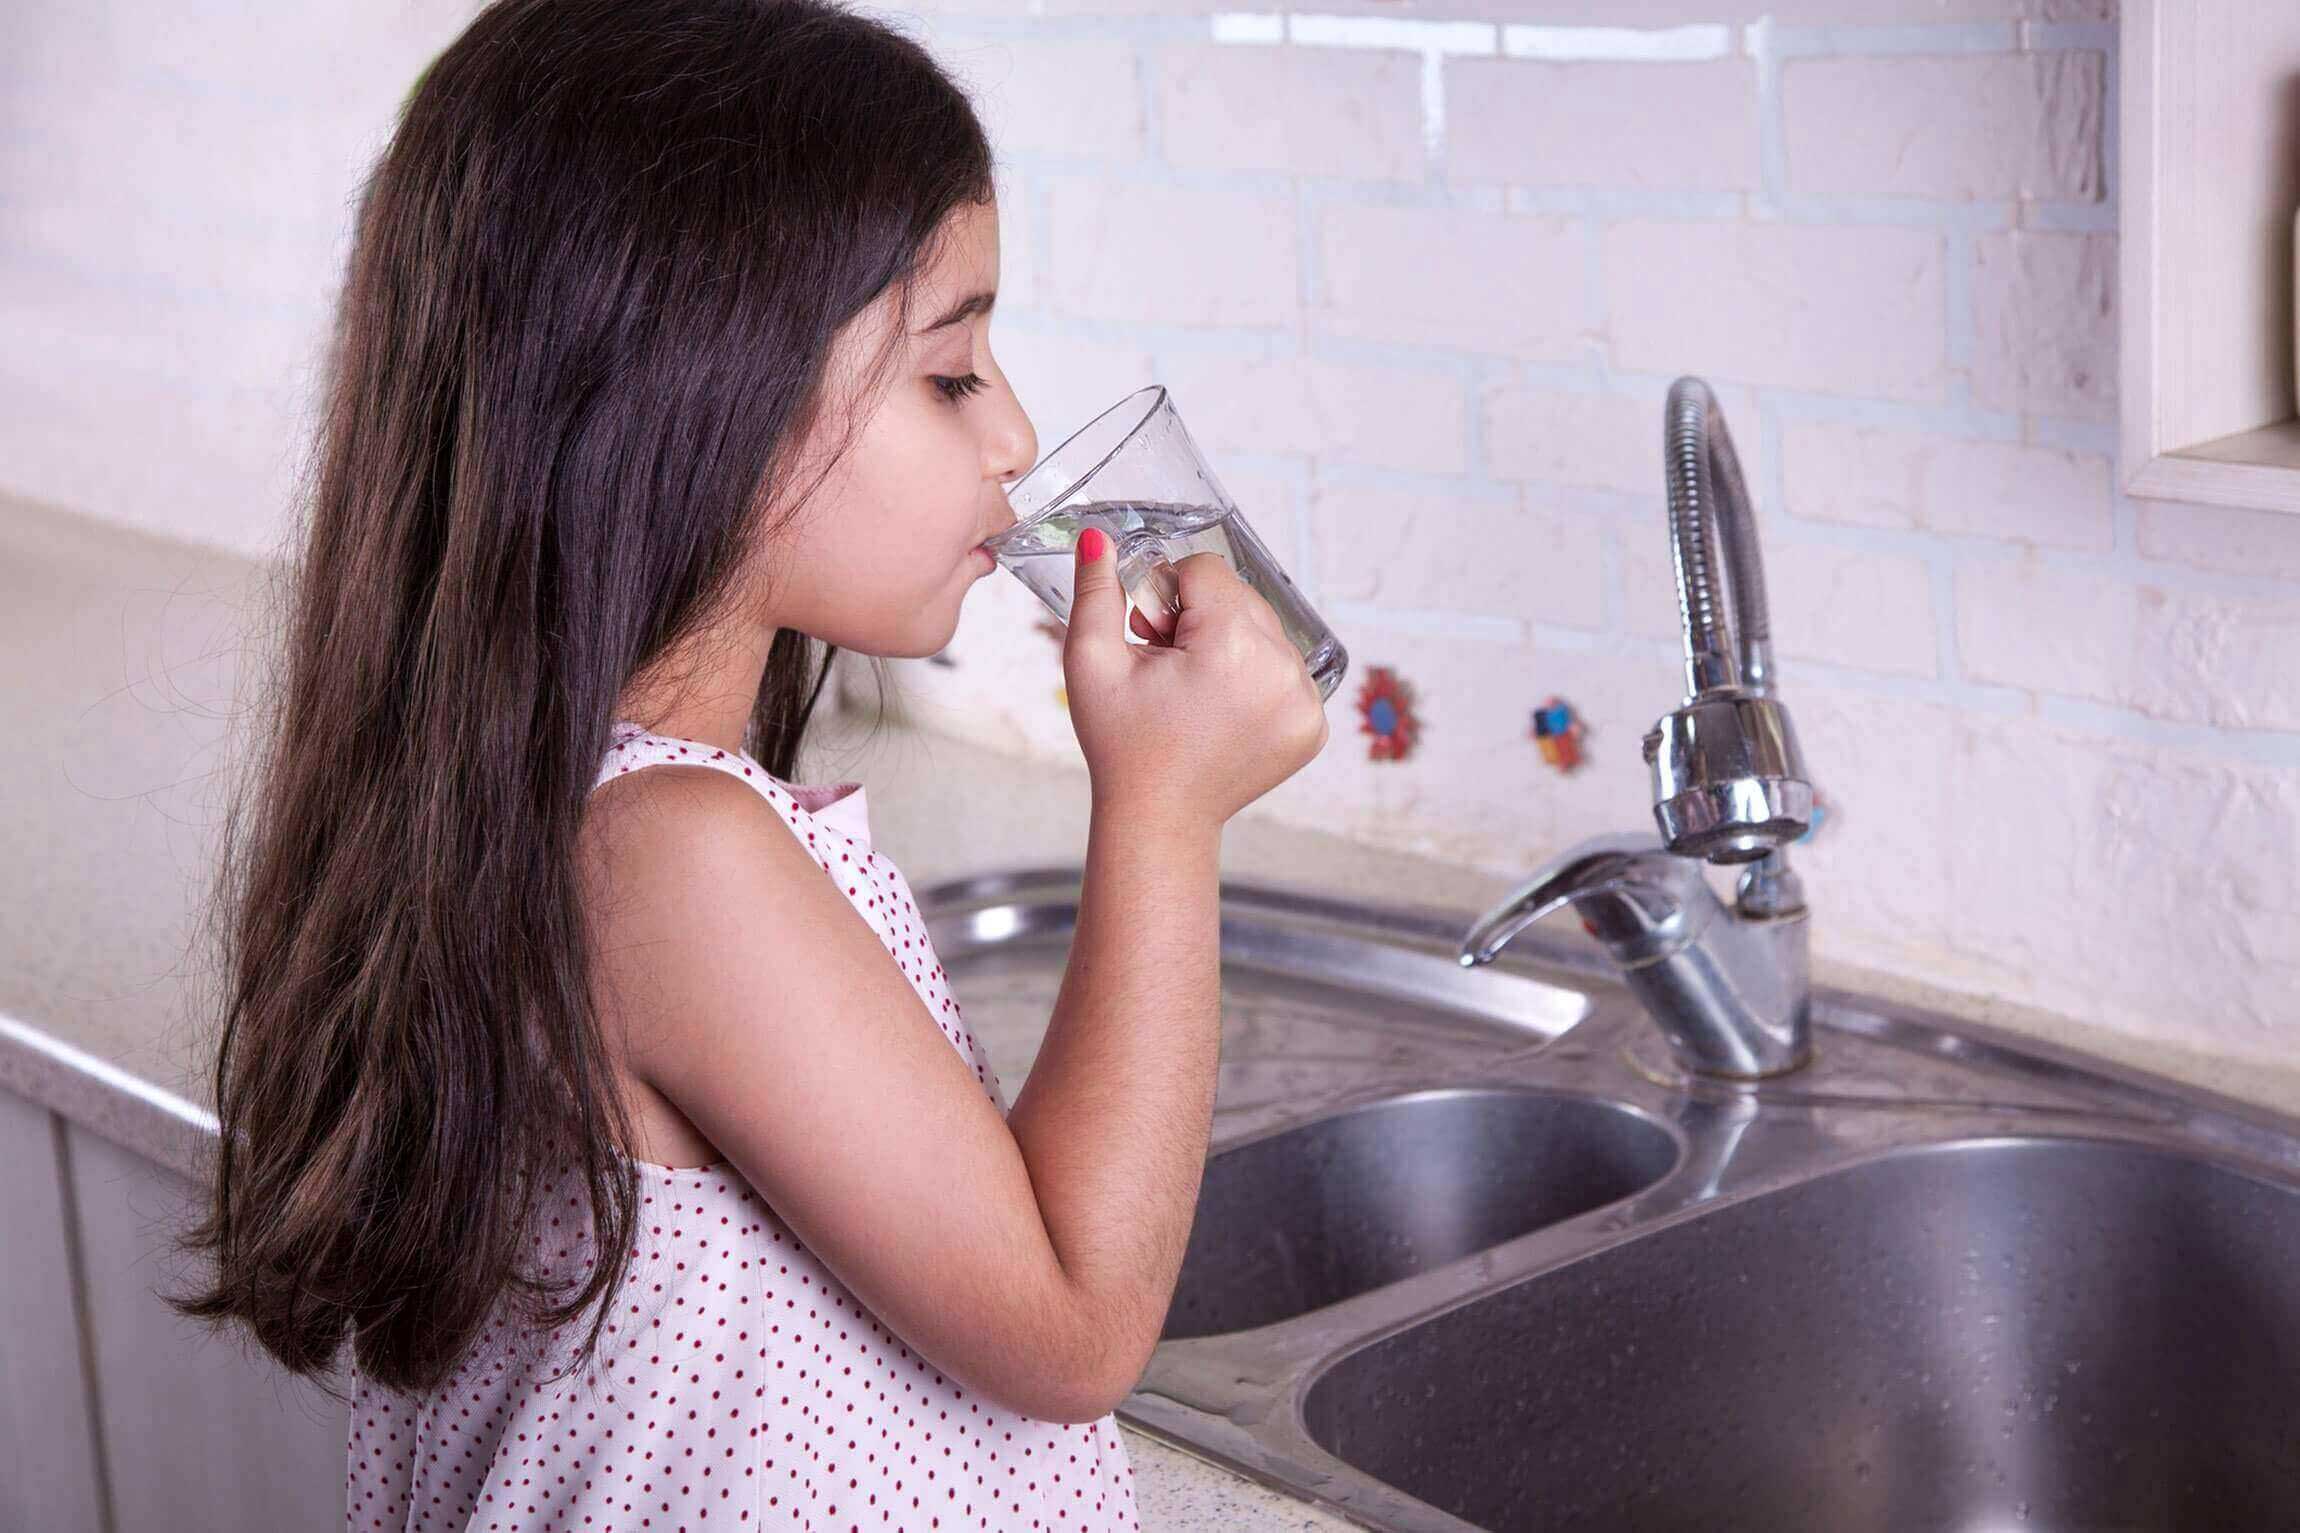 Is Fluoride Bad For You? Or Is Adding Fluoride To Water A Good Thing?